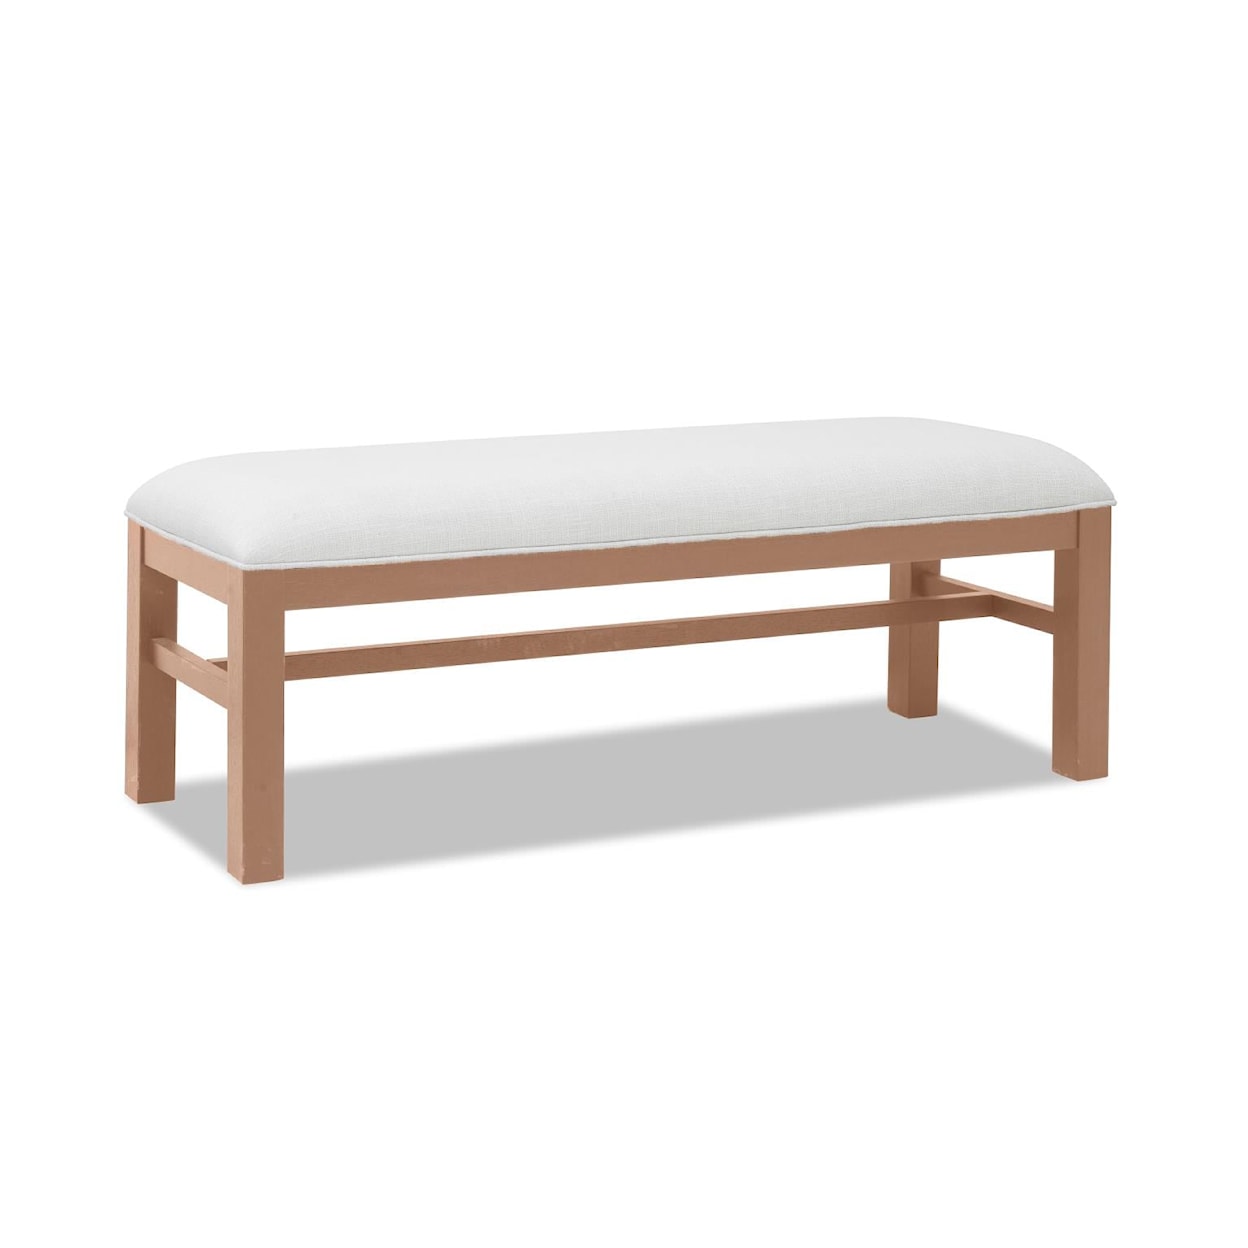 Trisha Yearwood Home Collection by Legacy Classic Today's Traditions Bed Bench